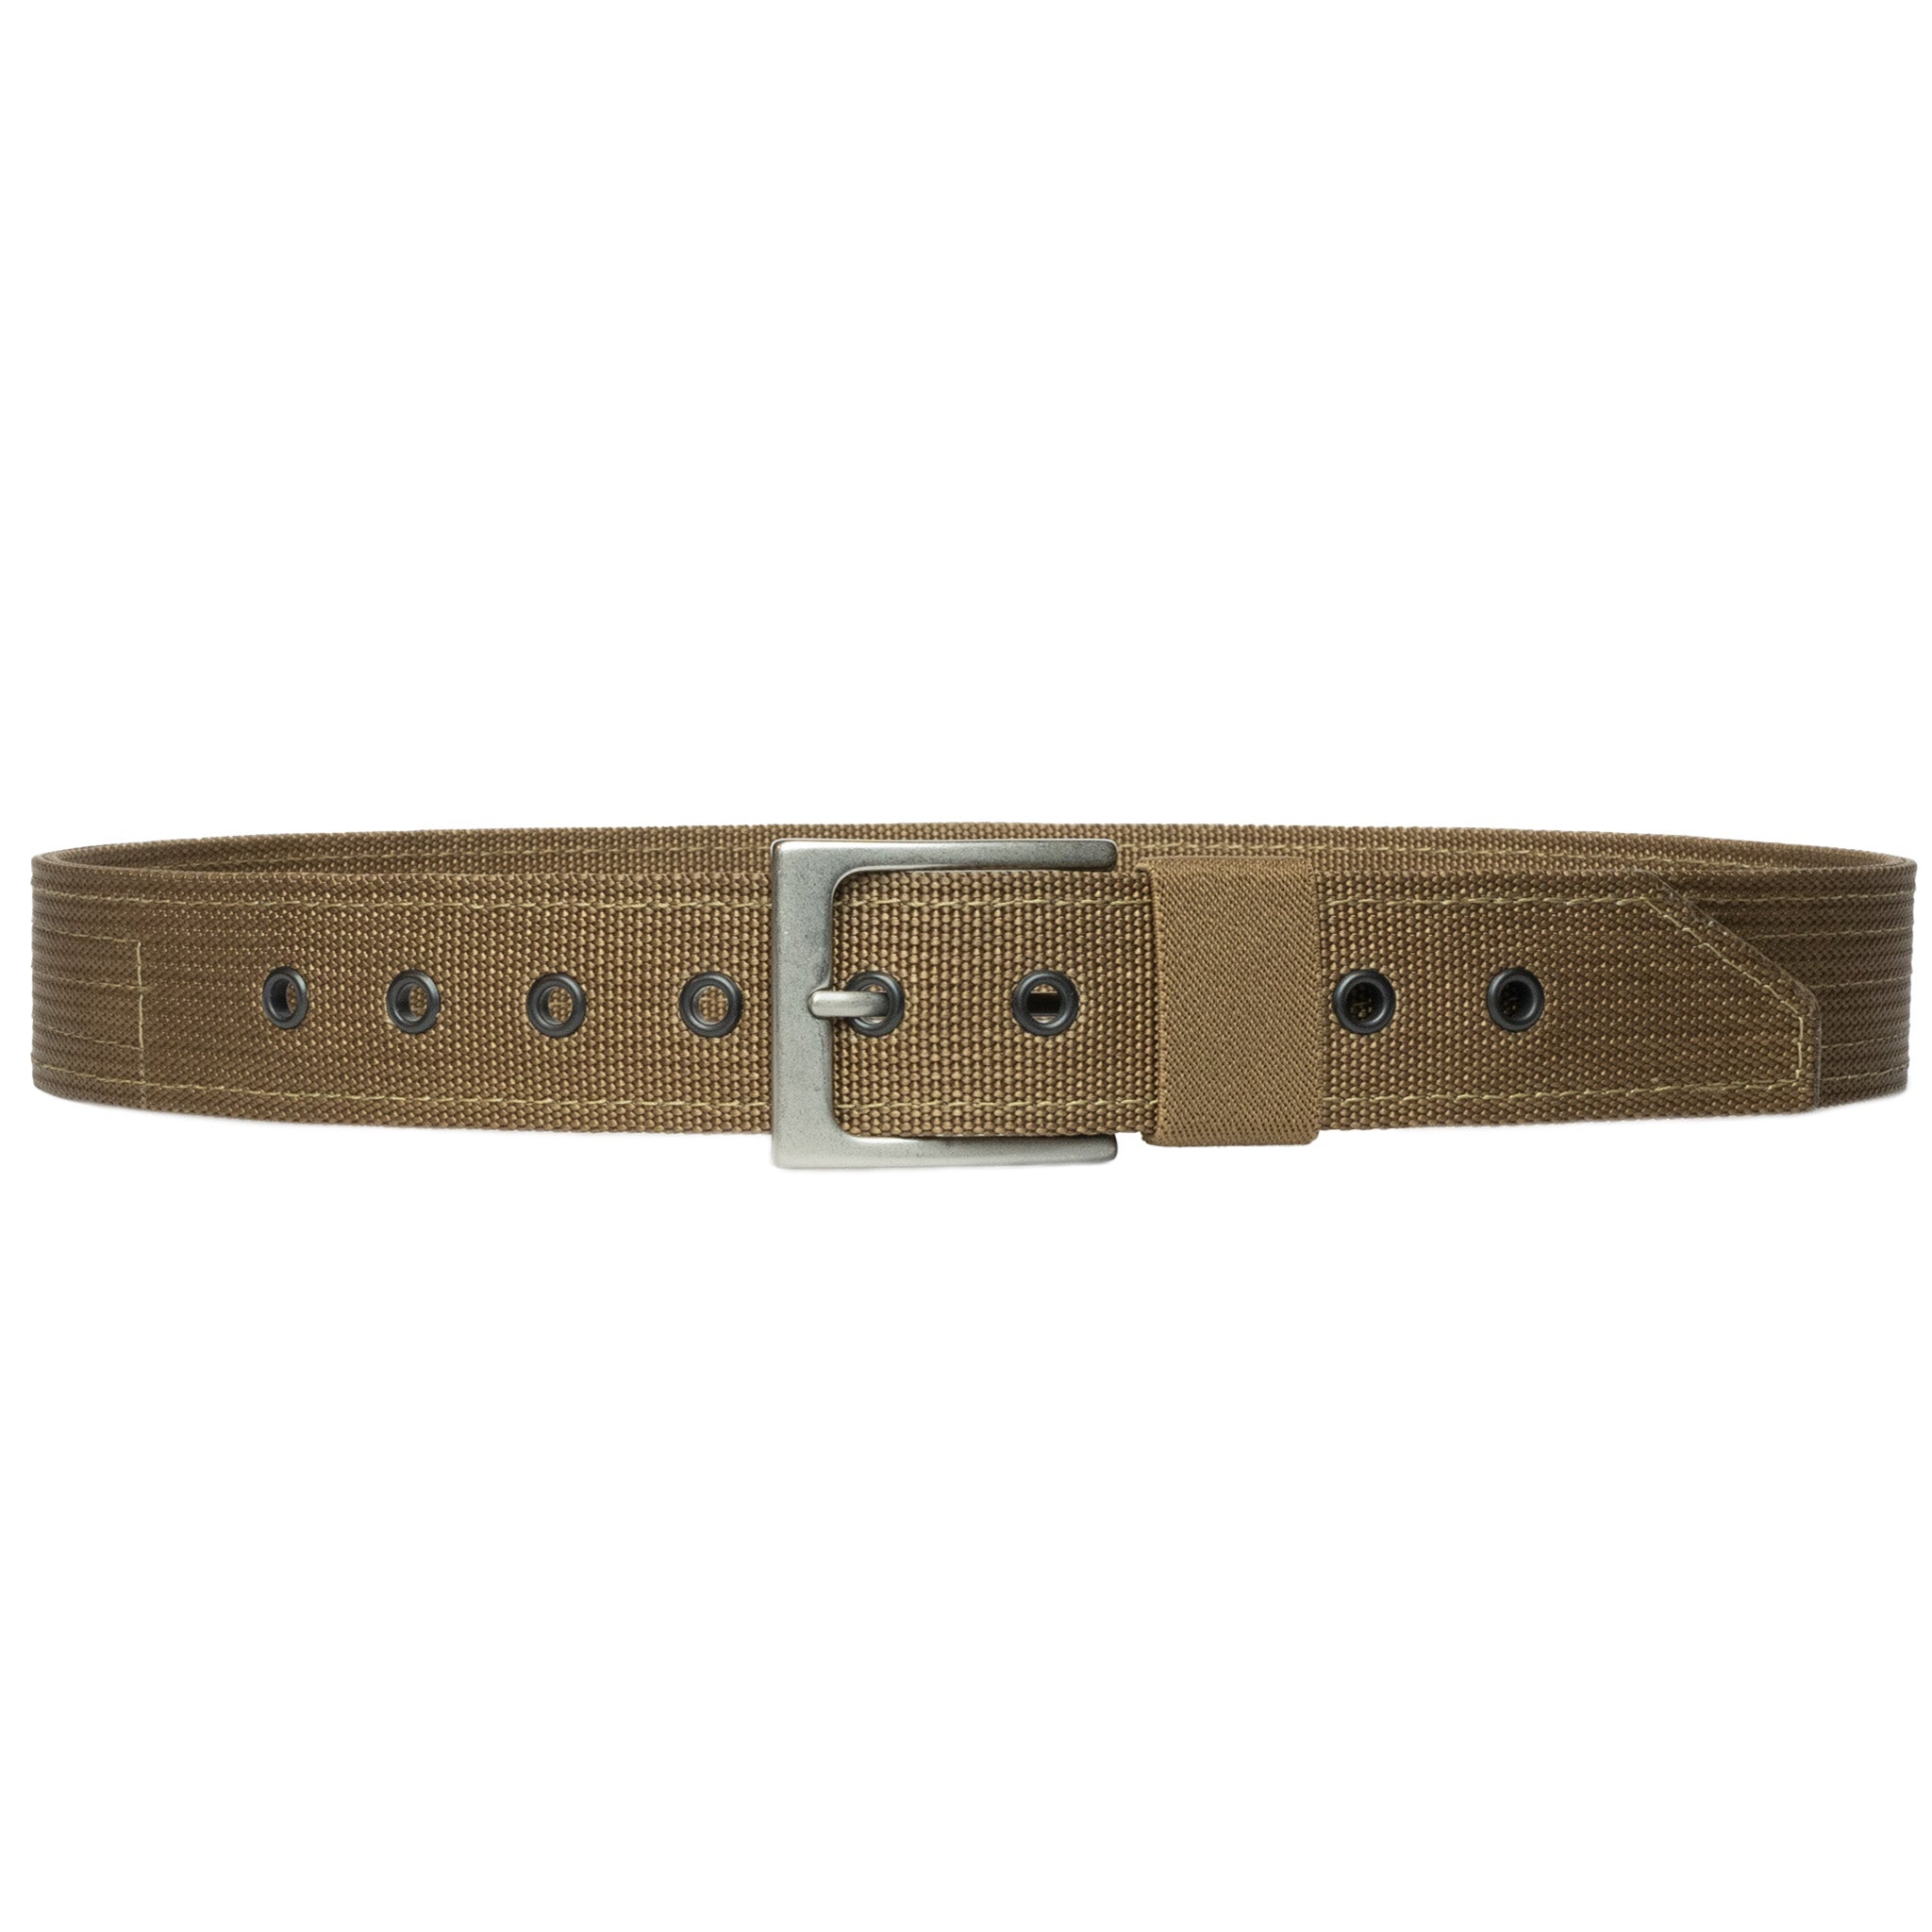 Emissary EDC Belt in Coyote with Silver Buckle